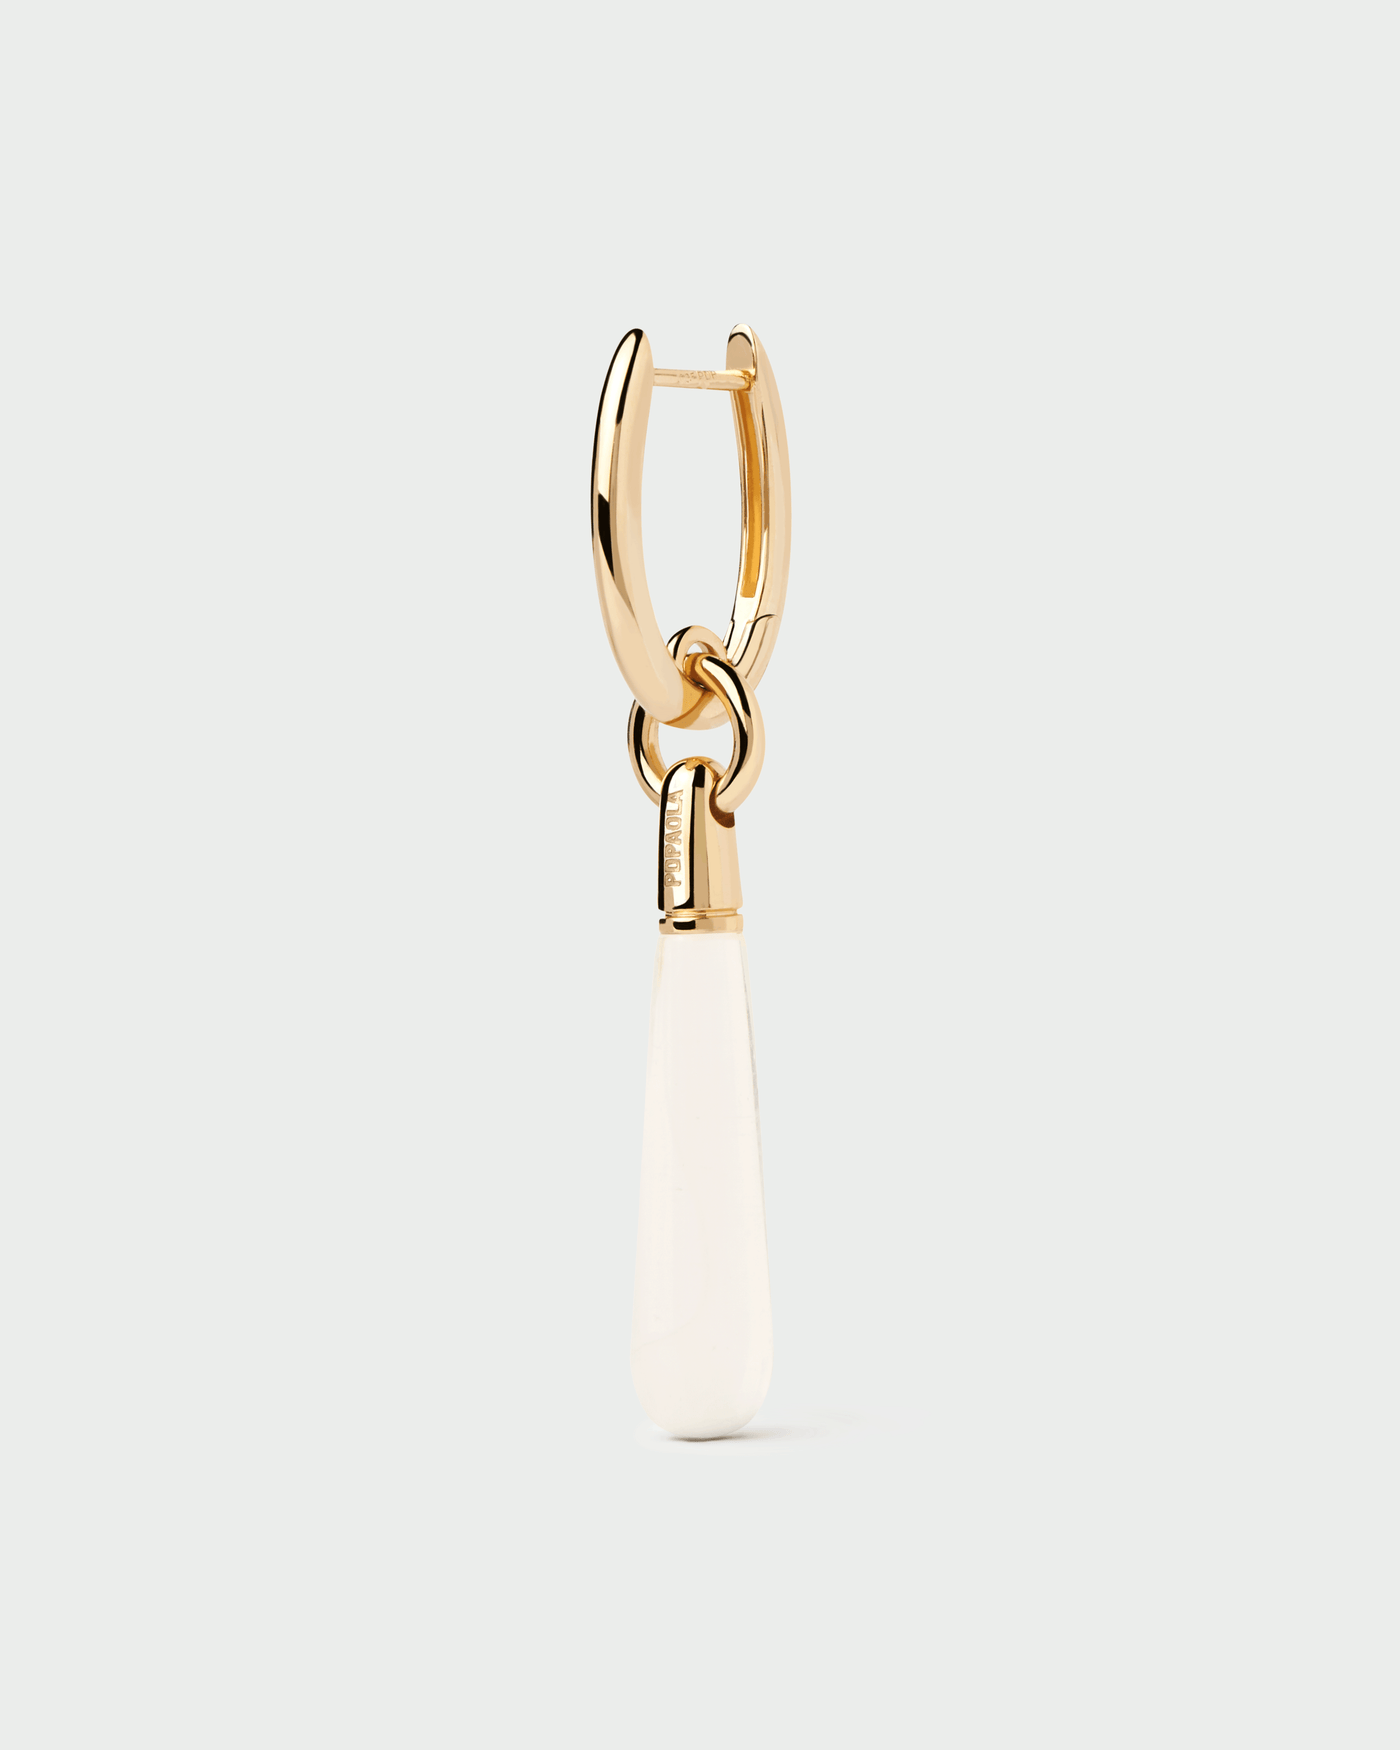 Rock crystal large Jupiter single hoop. Gold-plated single hoop with a transparent gemstone drop pendant . Get the latest arrival from PDPAOLA. Place your order safely and get this Best Seller.